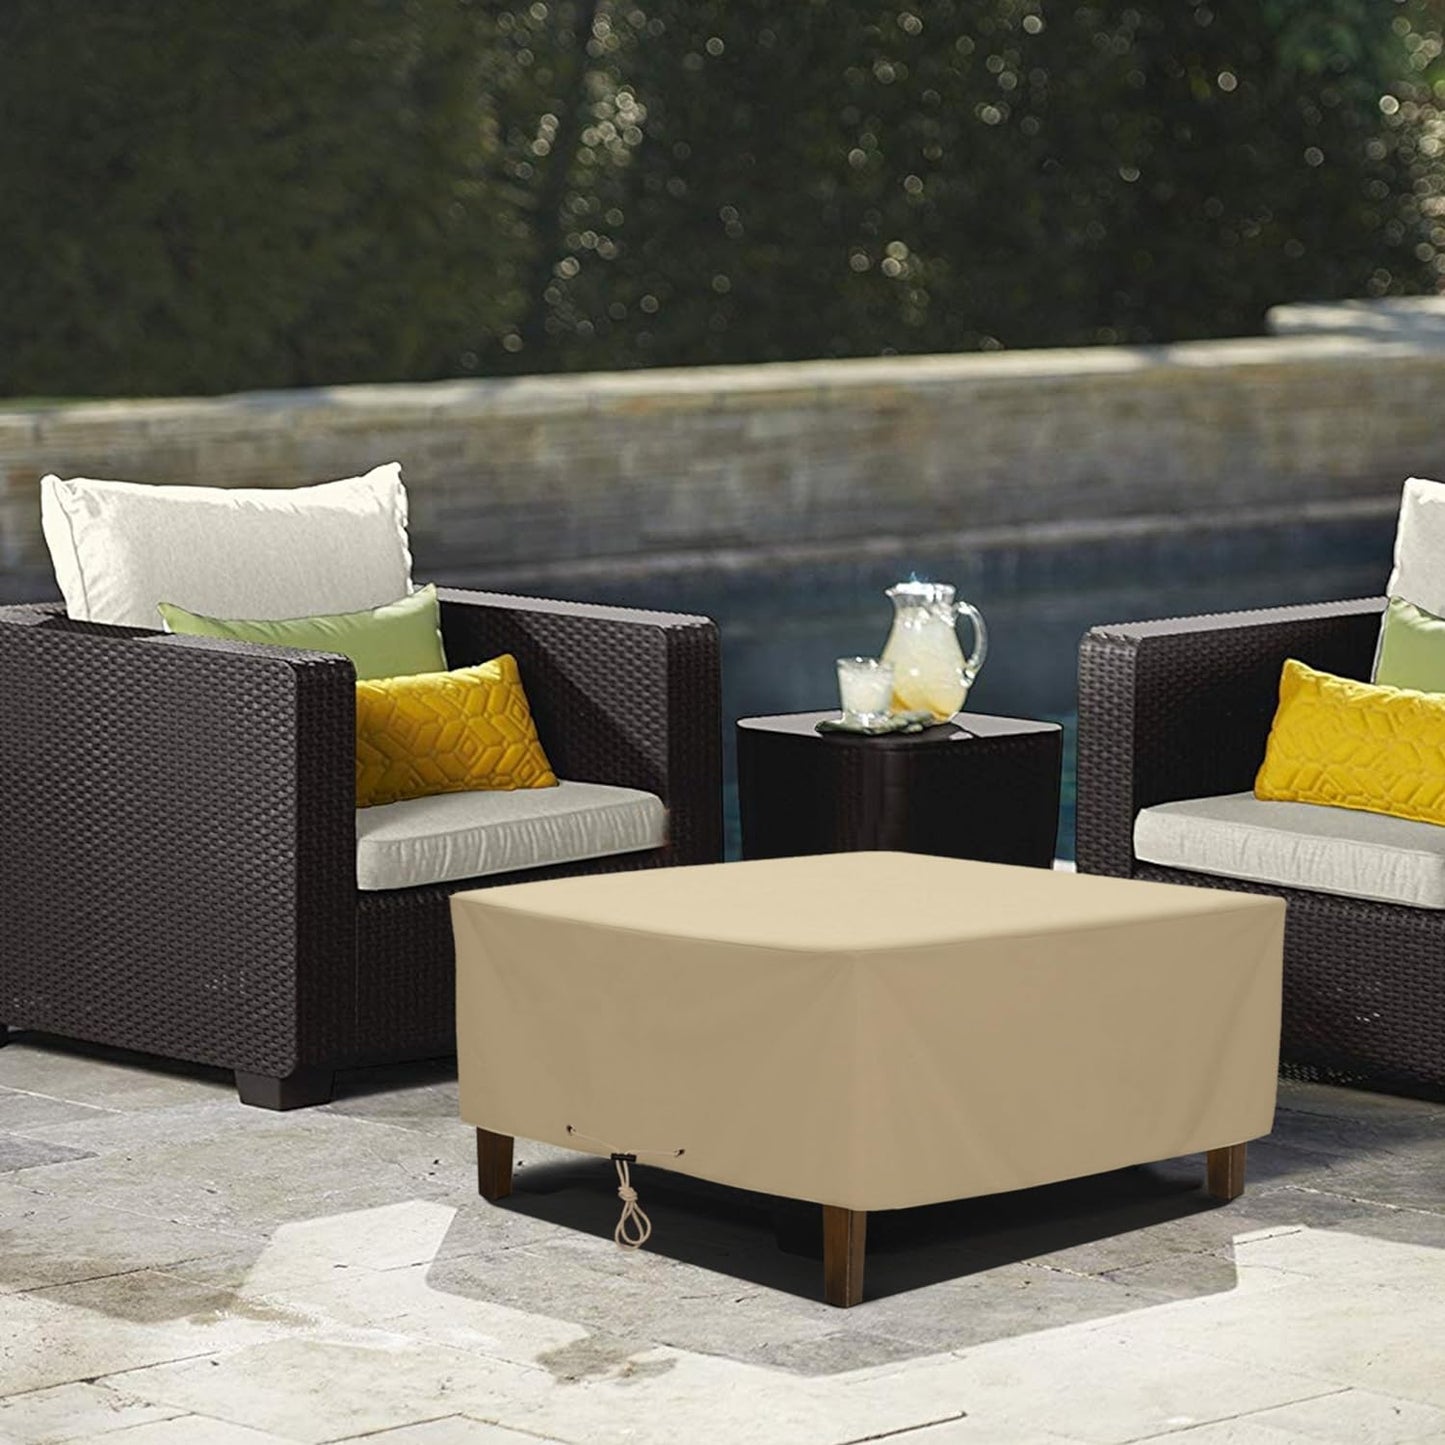 "Beige Waterproof Outdoor Ottoman Cover: Heavy Duty, All-Weather Protection, 32" x 32" x 18""